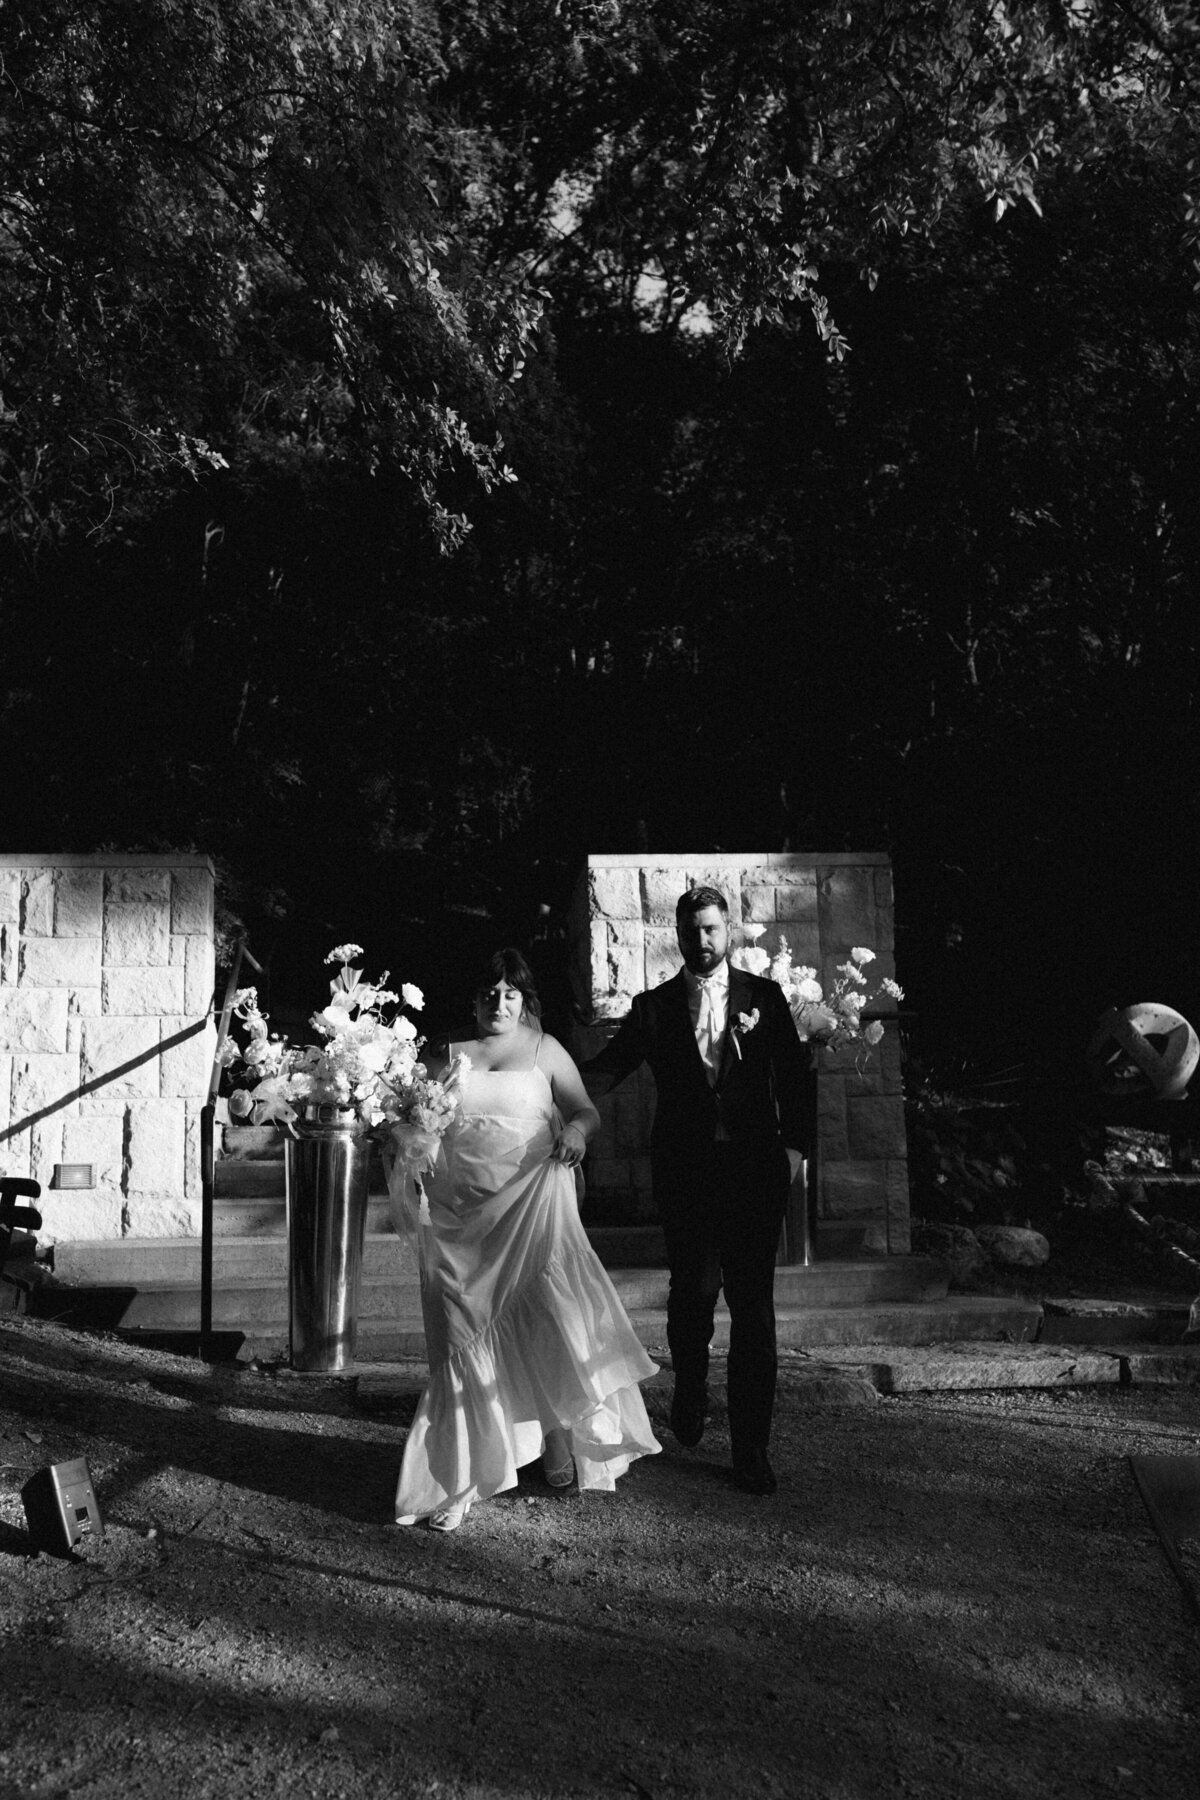 Bride and groom walking in grounds of Couple portraits in the grounds of Umlauf Sculpture Garden, Austin